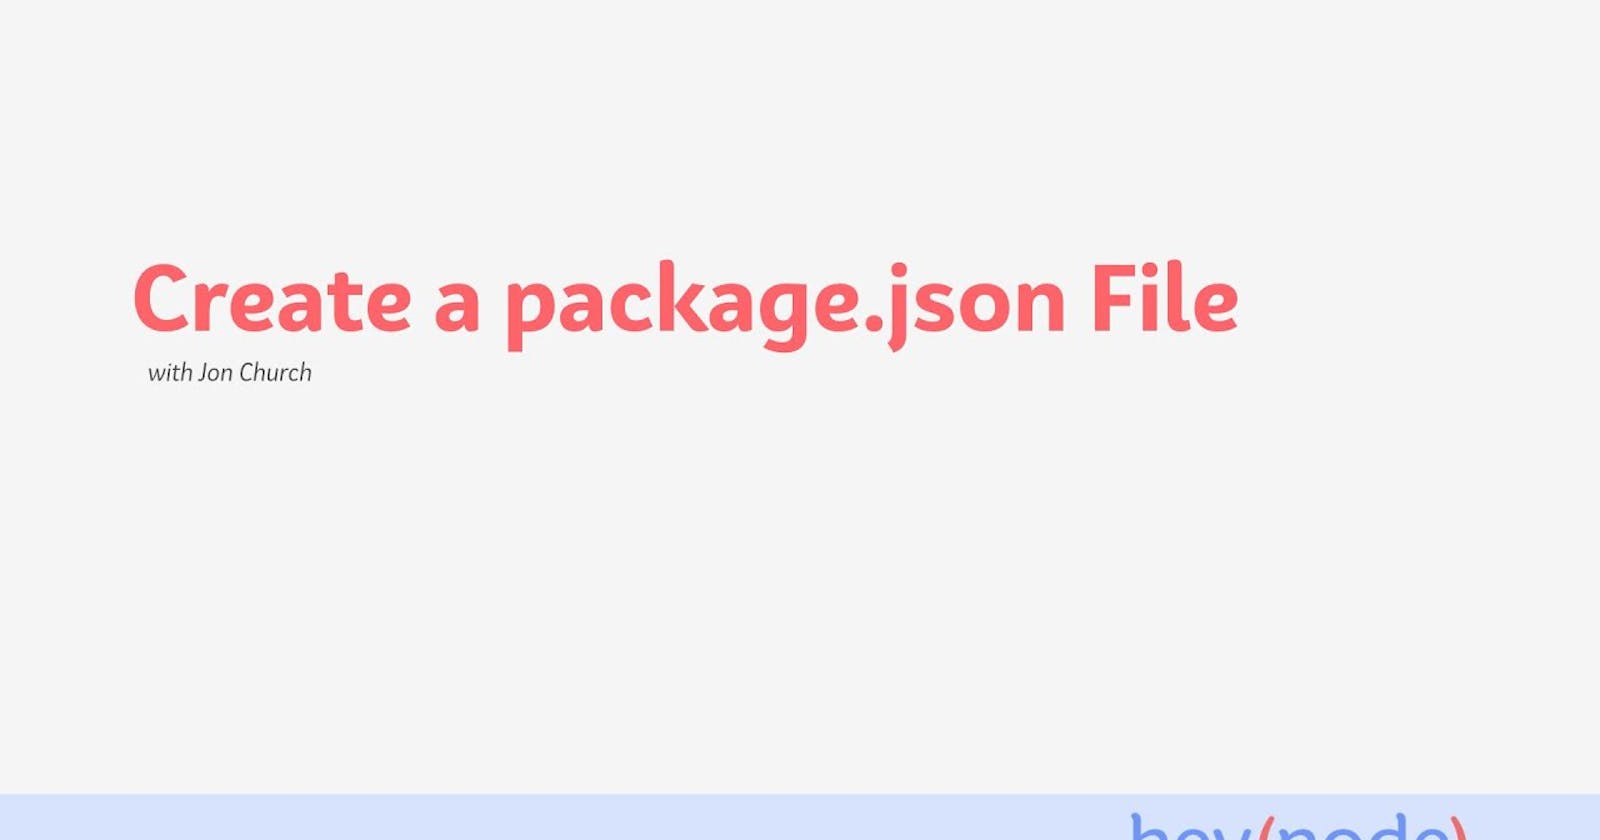 A faster way to create a package.json file